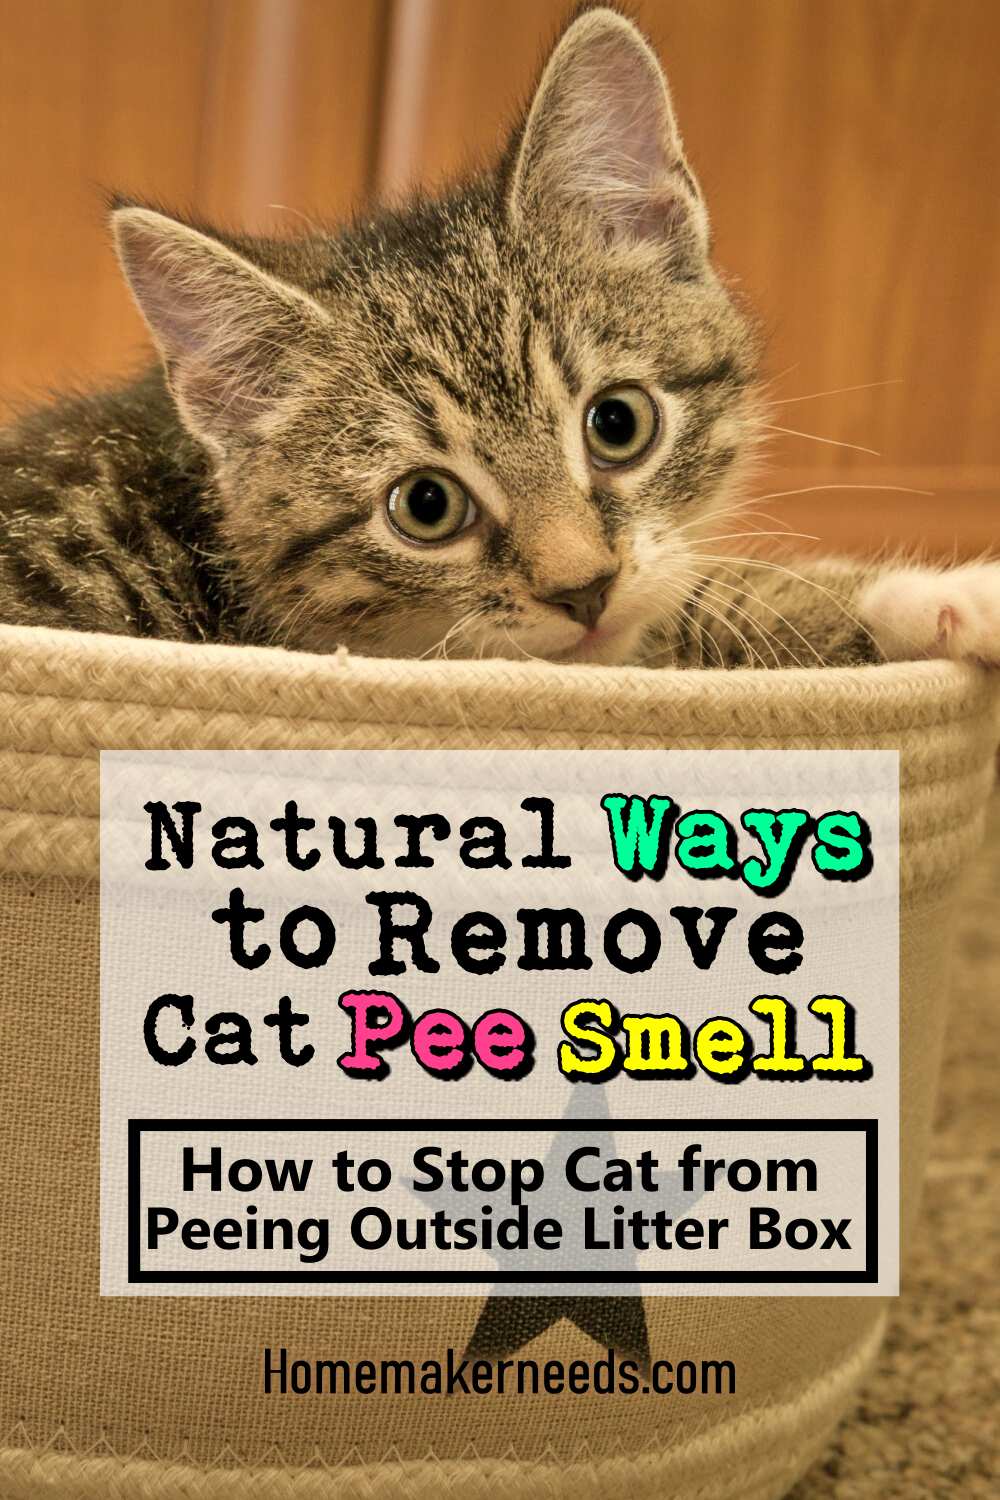 Natural Ways To Remove Cat Pee Smell! in 2020